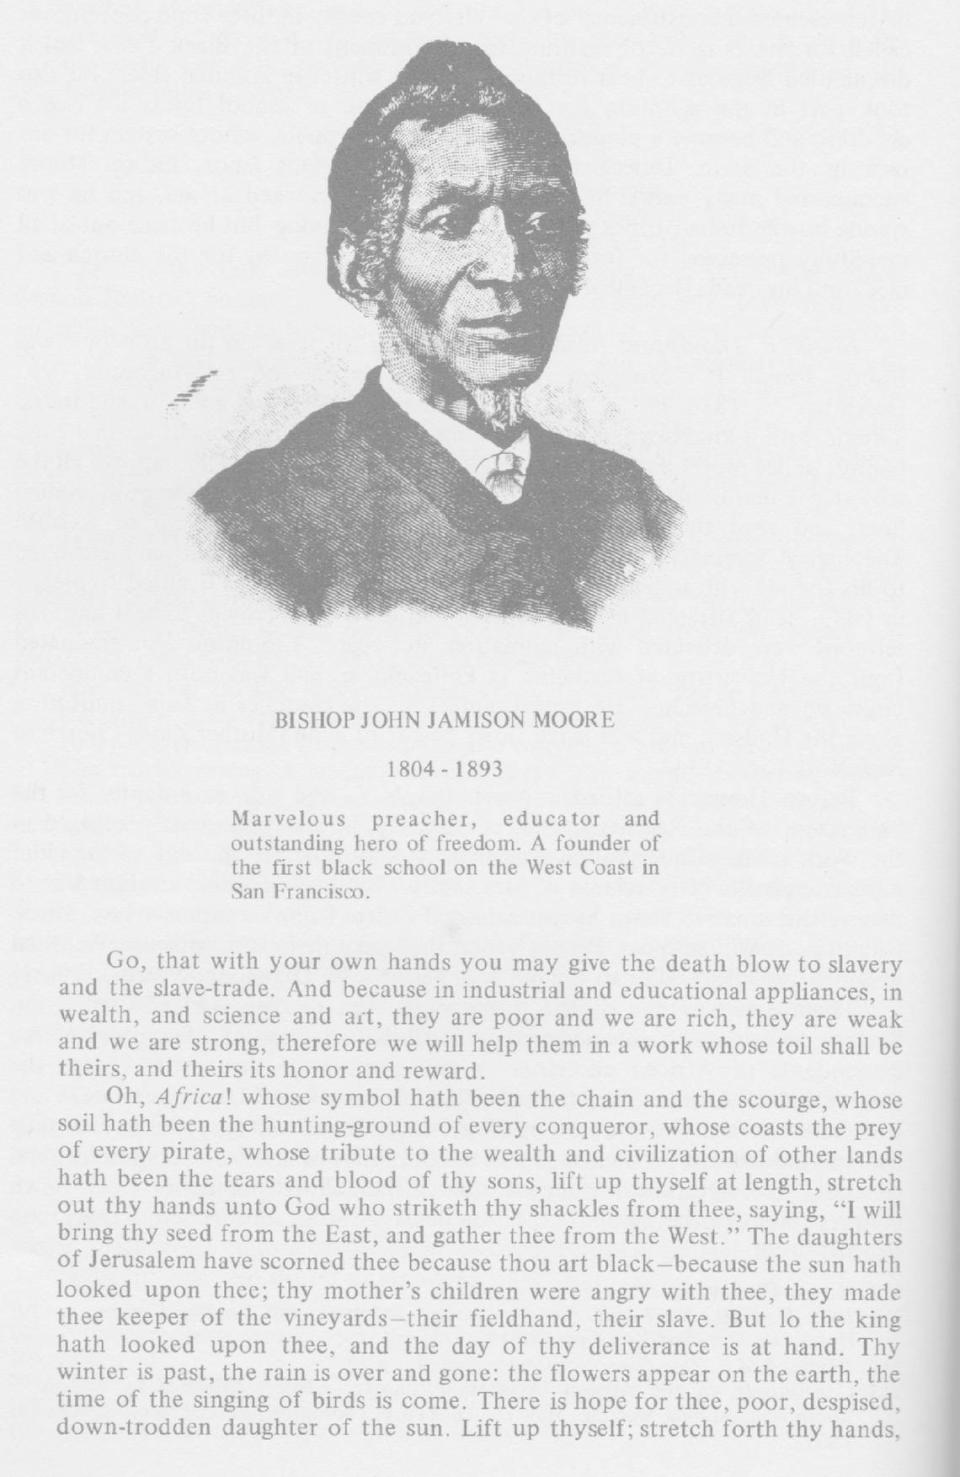 Bishop John Jameison Moore, founder of Moore’s Sanctuary AME Zion Church in west Charlotte.